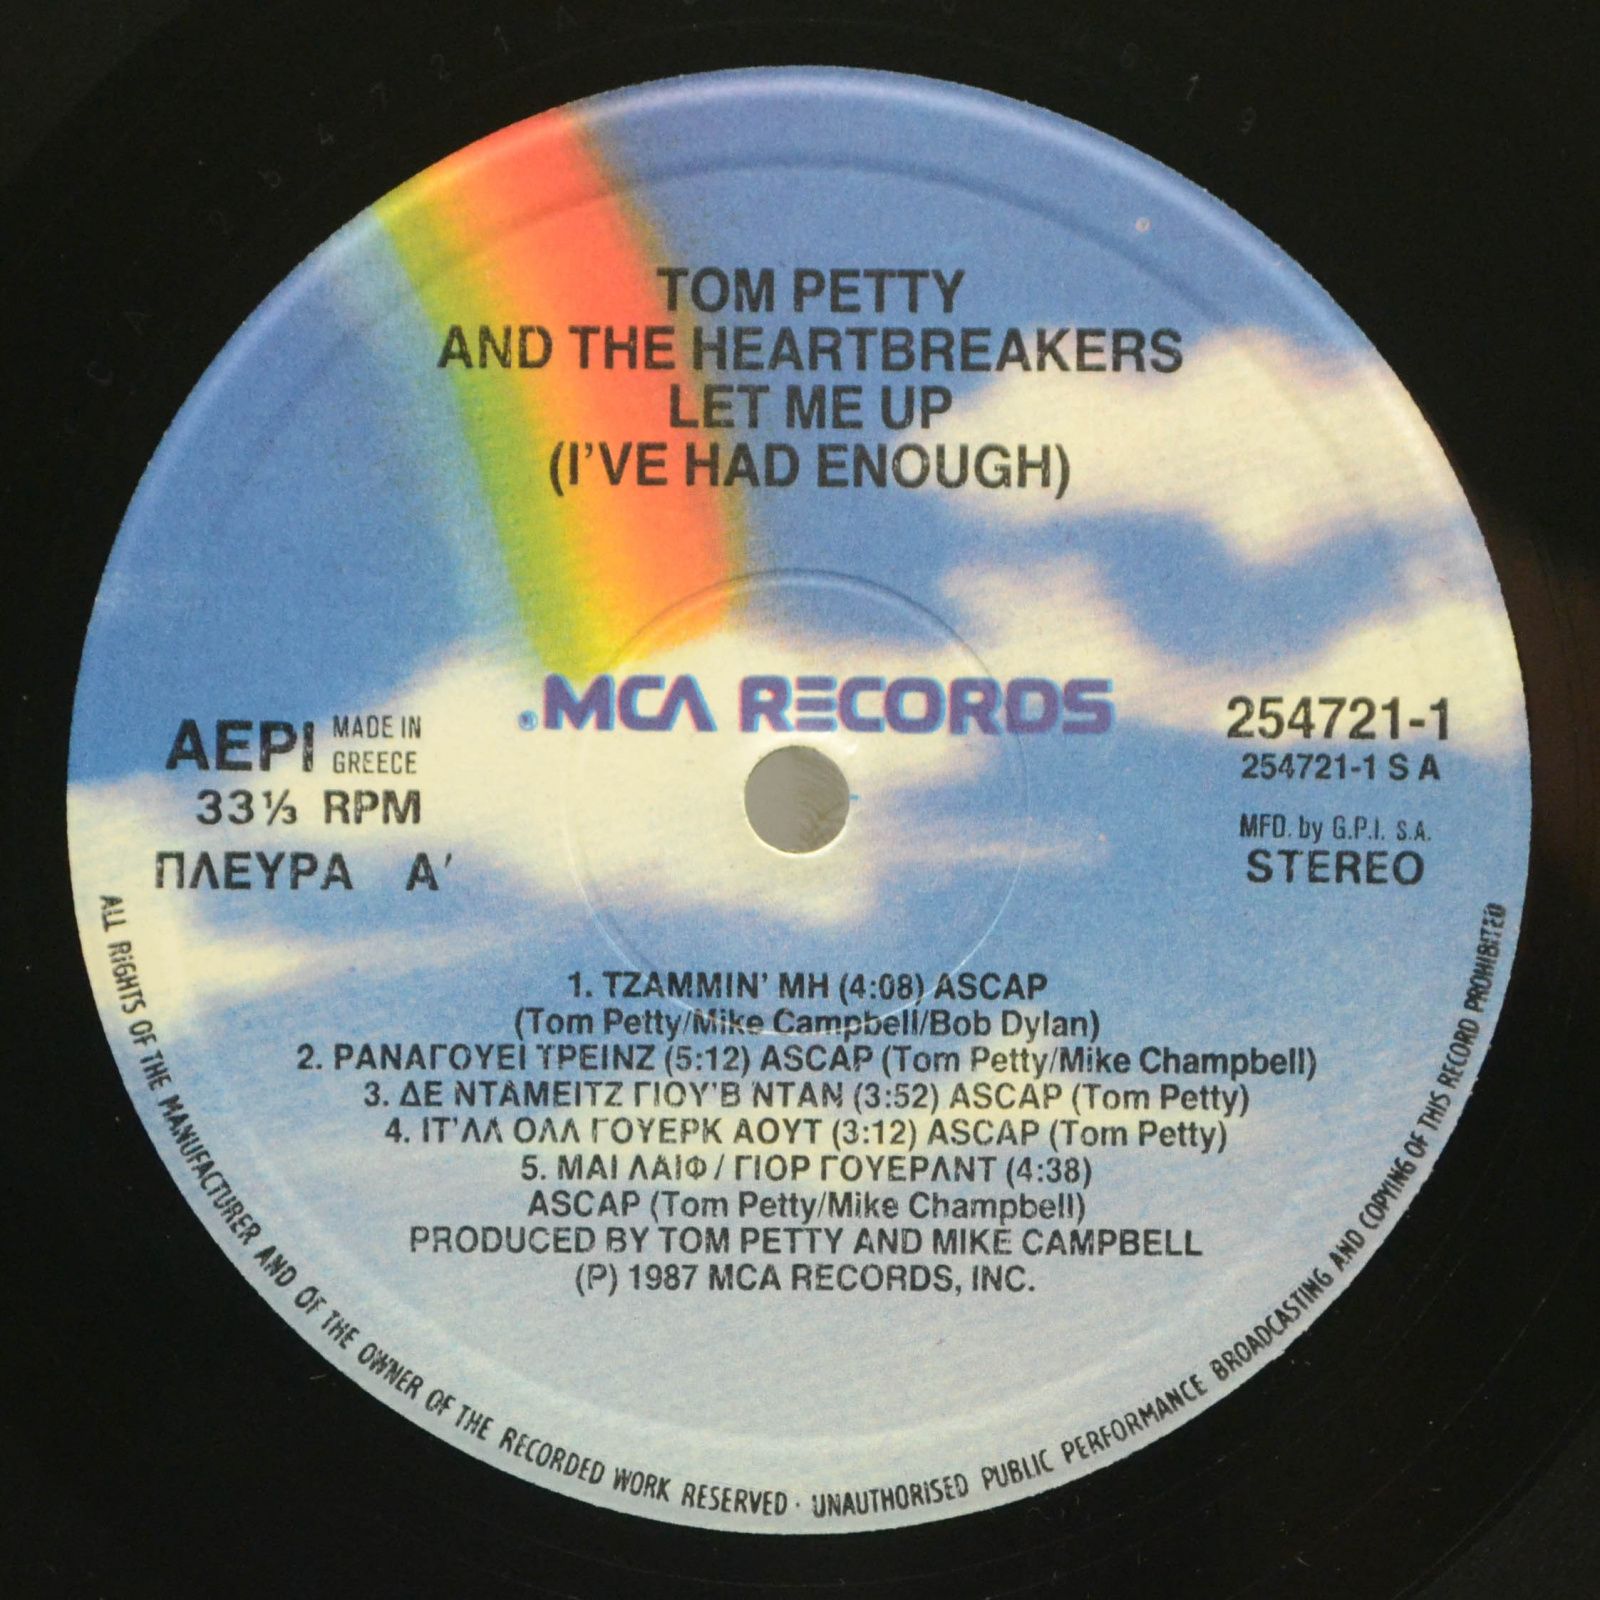 Tom Petty And The Heartbreakers — Let Me Up (I've Had Enough), 1987